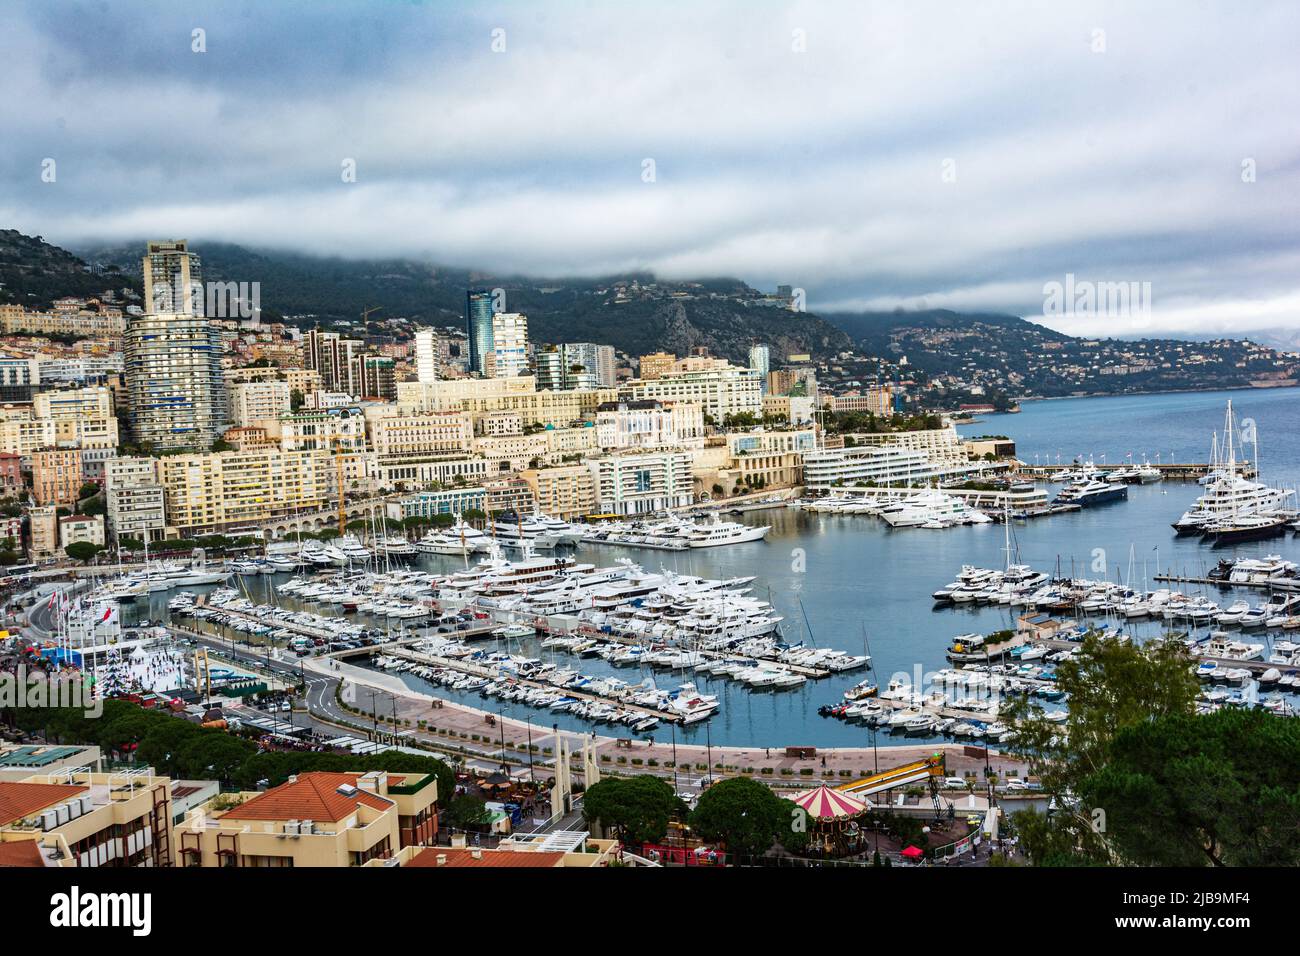 View of Montecarlo and its harbor from above, French Riviera, France Stock Photo